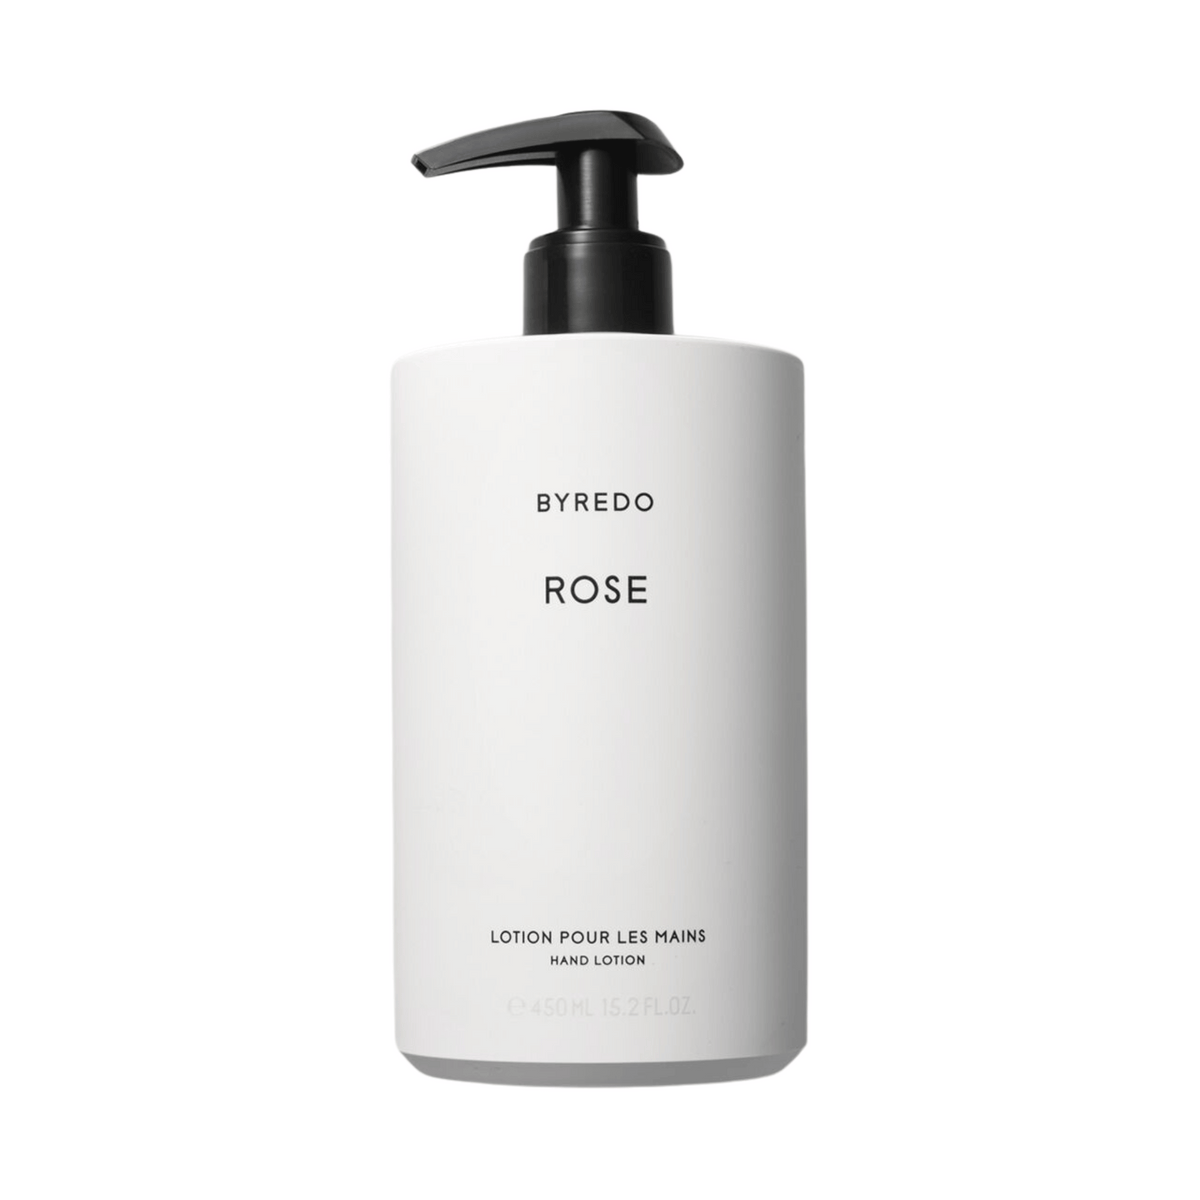 Primary Image of Rose Hand Lotion